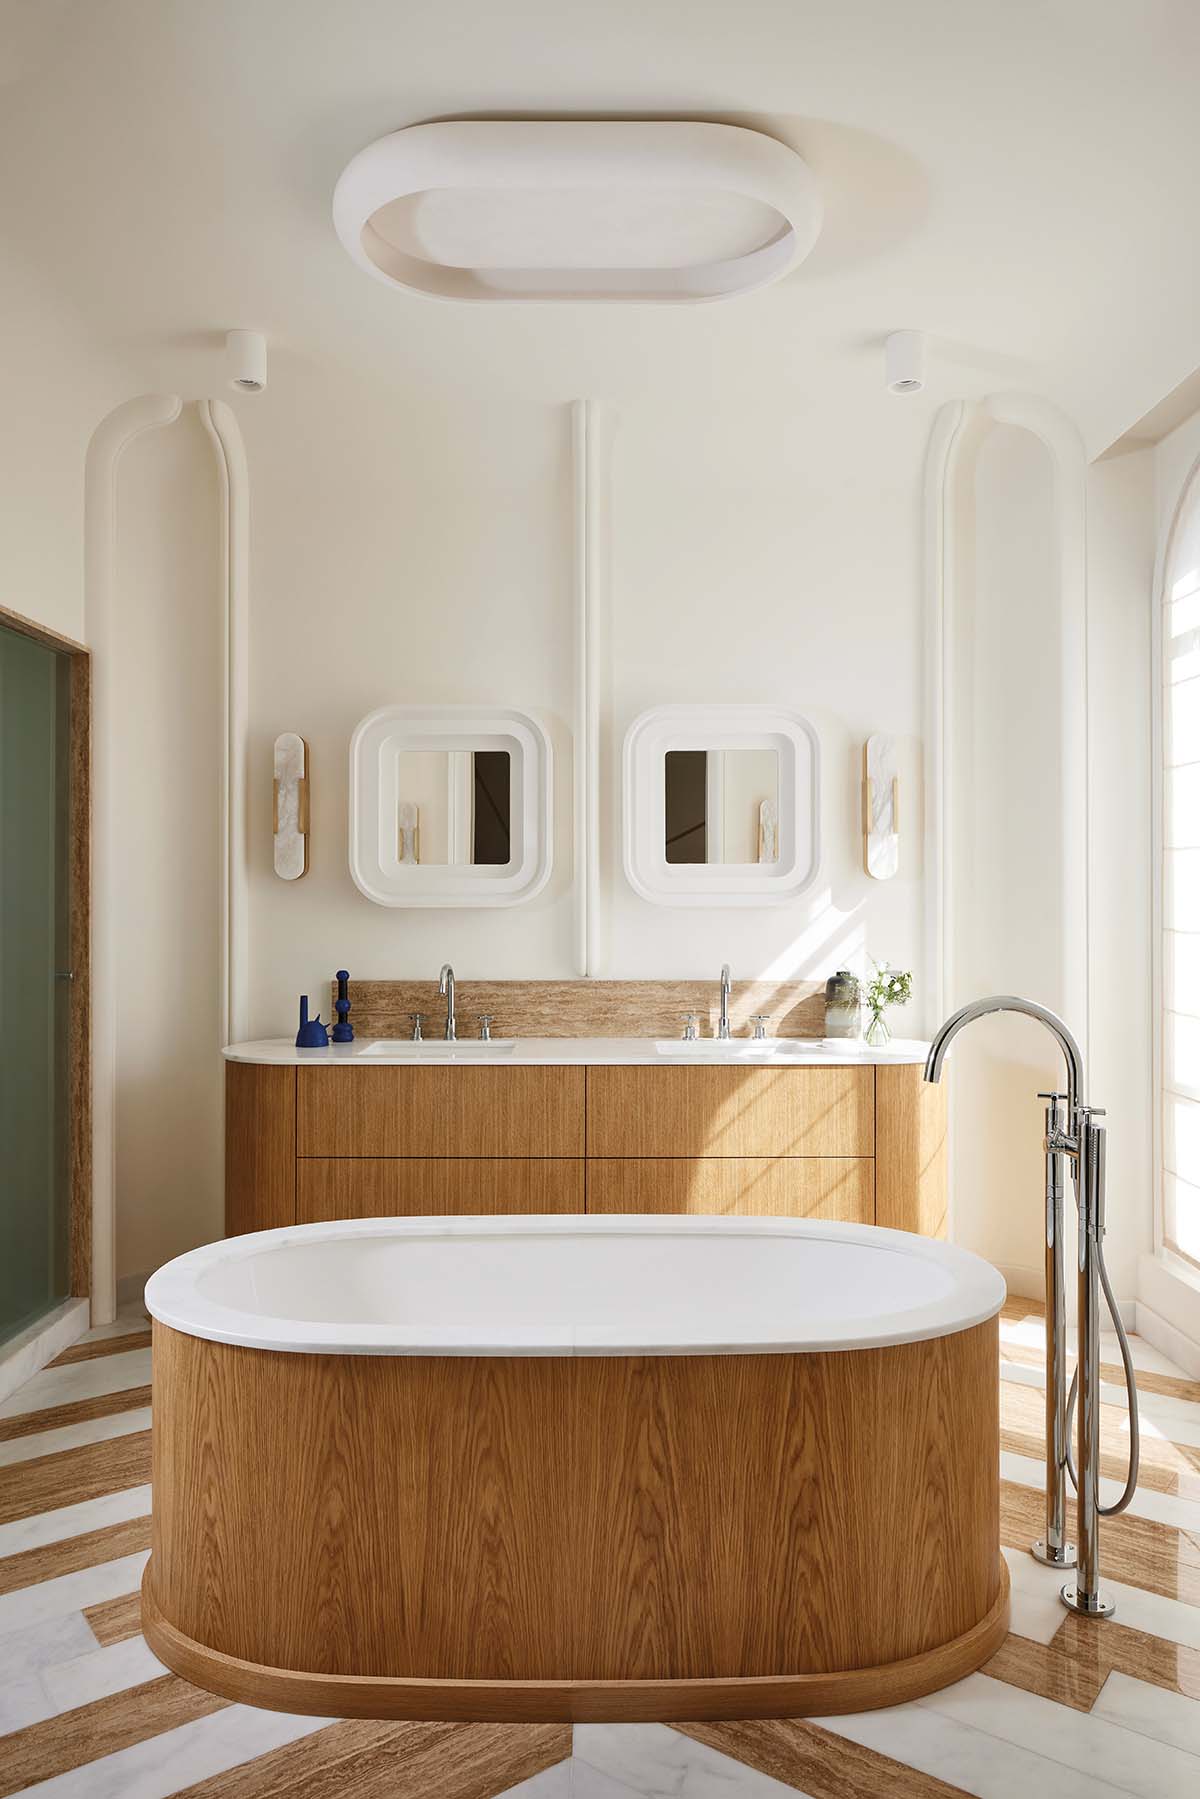 A bathroom in Paris, designed by Fabrice Jean featuring oak and plaster accents and a chevron patterned floor made up of travertine and white Macael marble